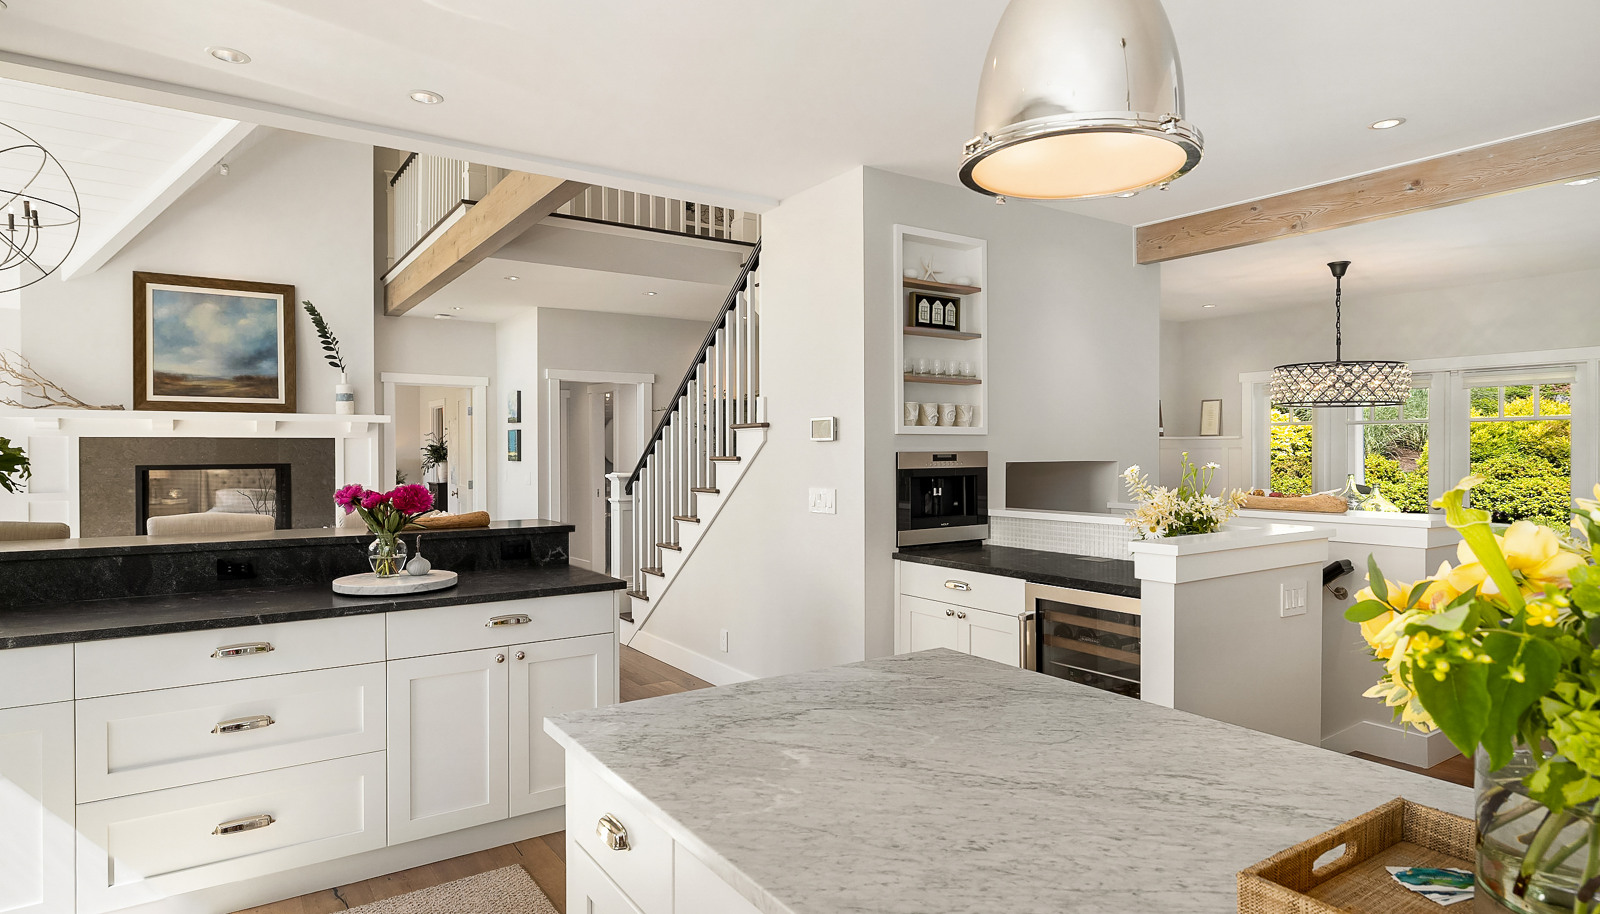 9' Carrara marble island is the centerpiece of the kitchen.